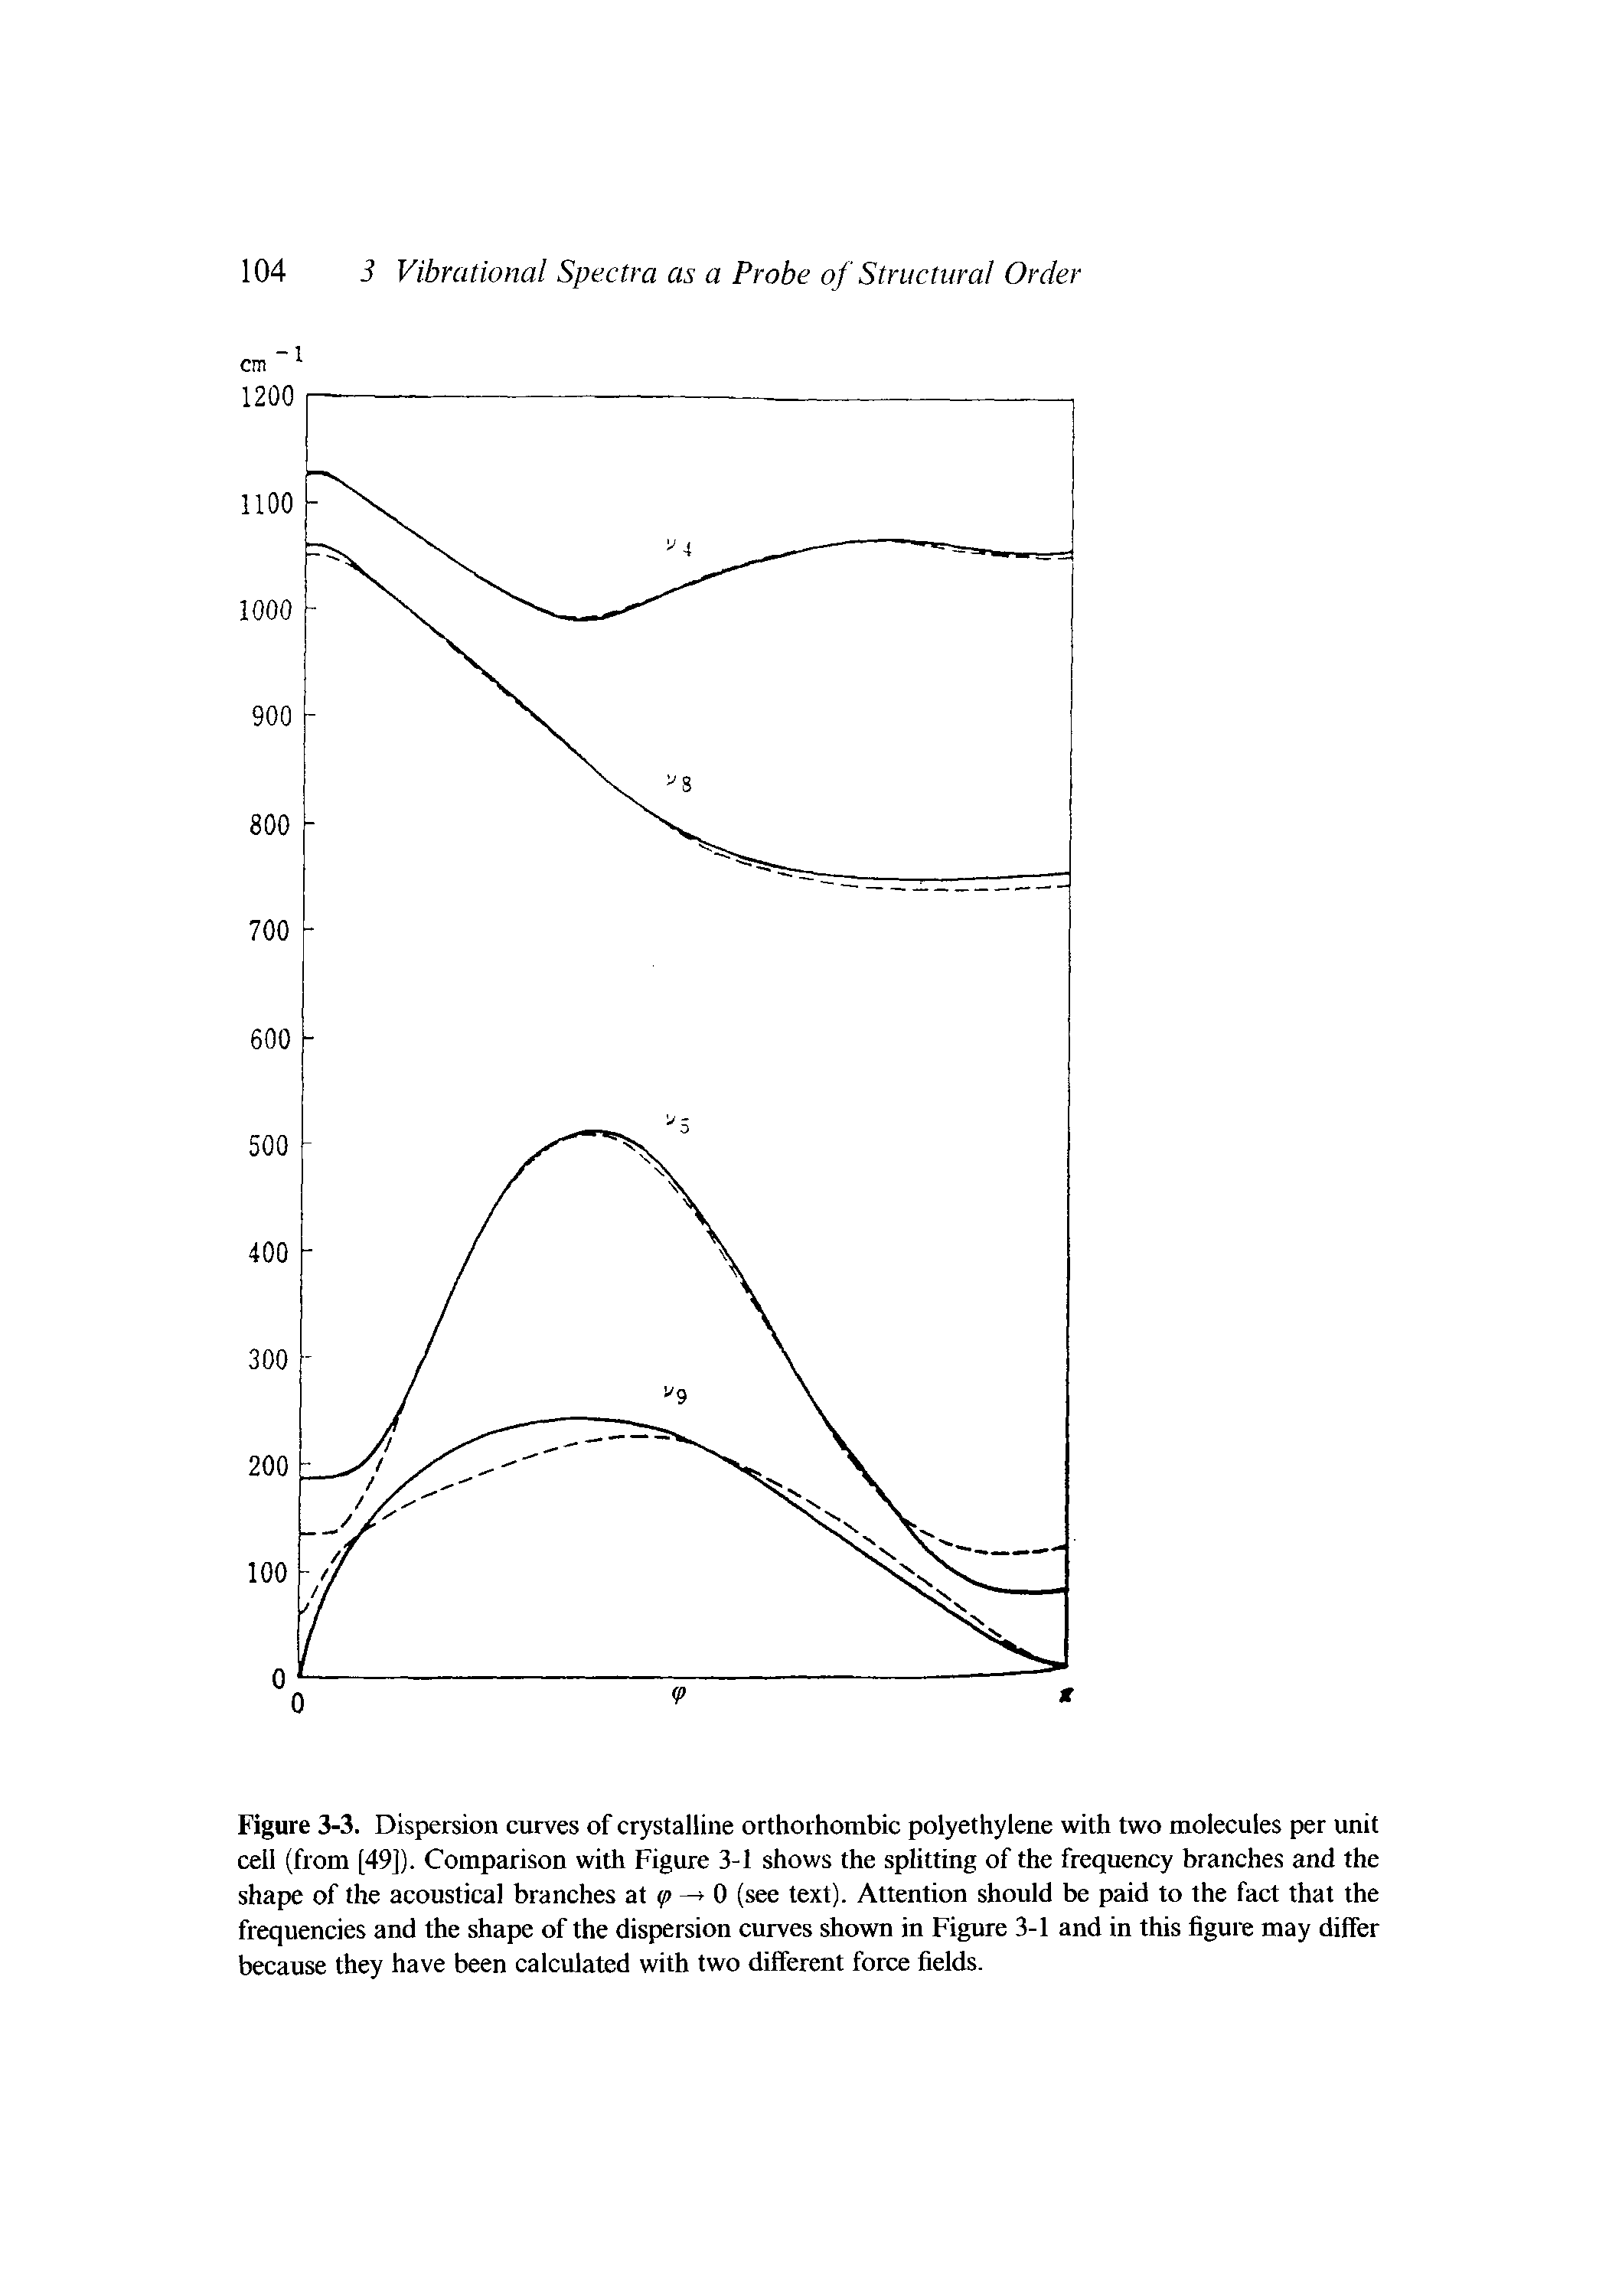 Figure 3-3. Dispersion curves of crystalline orthorhombic polyethylene with two molecules per unit cell (from [49]). Comparison with Figure 3-1 shows the splitting of the frequency branches and the shape of the acoustical branches at p 0 (see text). Attention should be paid to the fact that the frequencies and the shape of the dispersion curves shown in Figure 3-1 and in this figure may differ because they have been calculated with two different force fields.